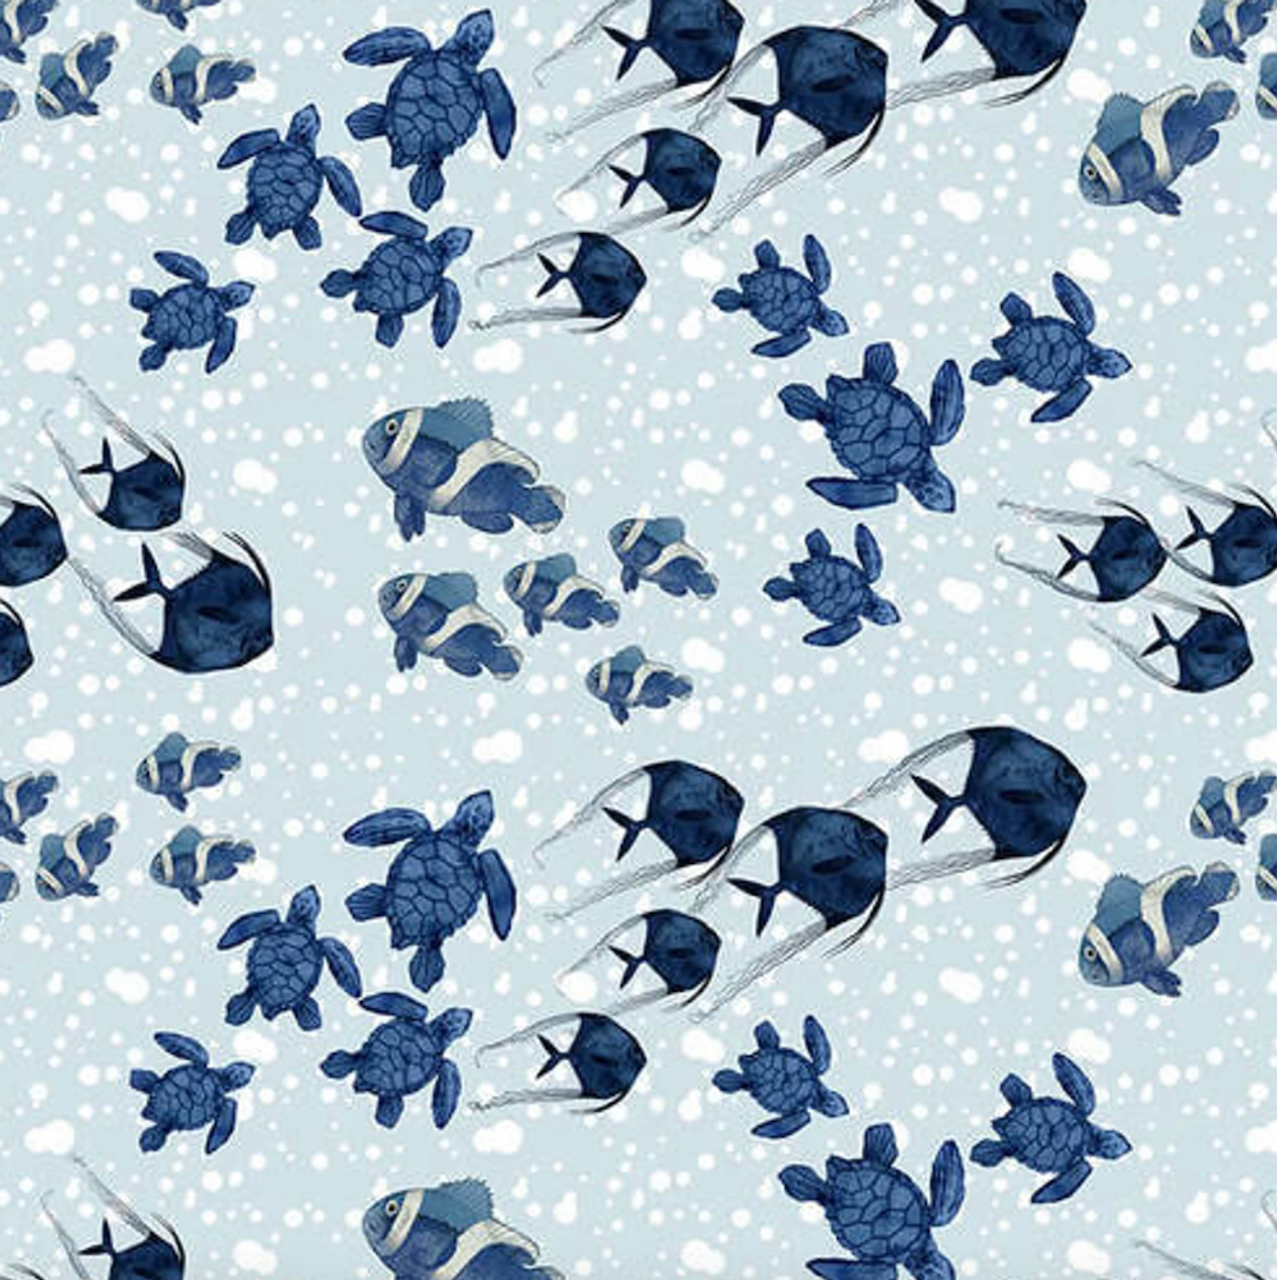 Blank Quilting Seaside Serenity Fish Lt. Blue Fabric By The Yard